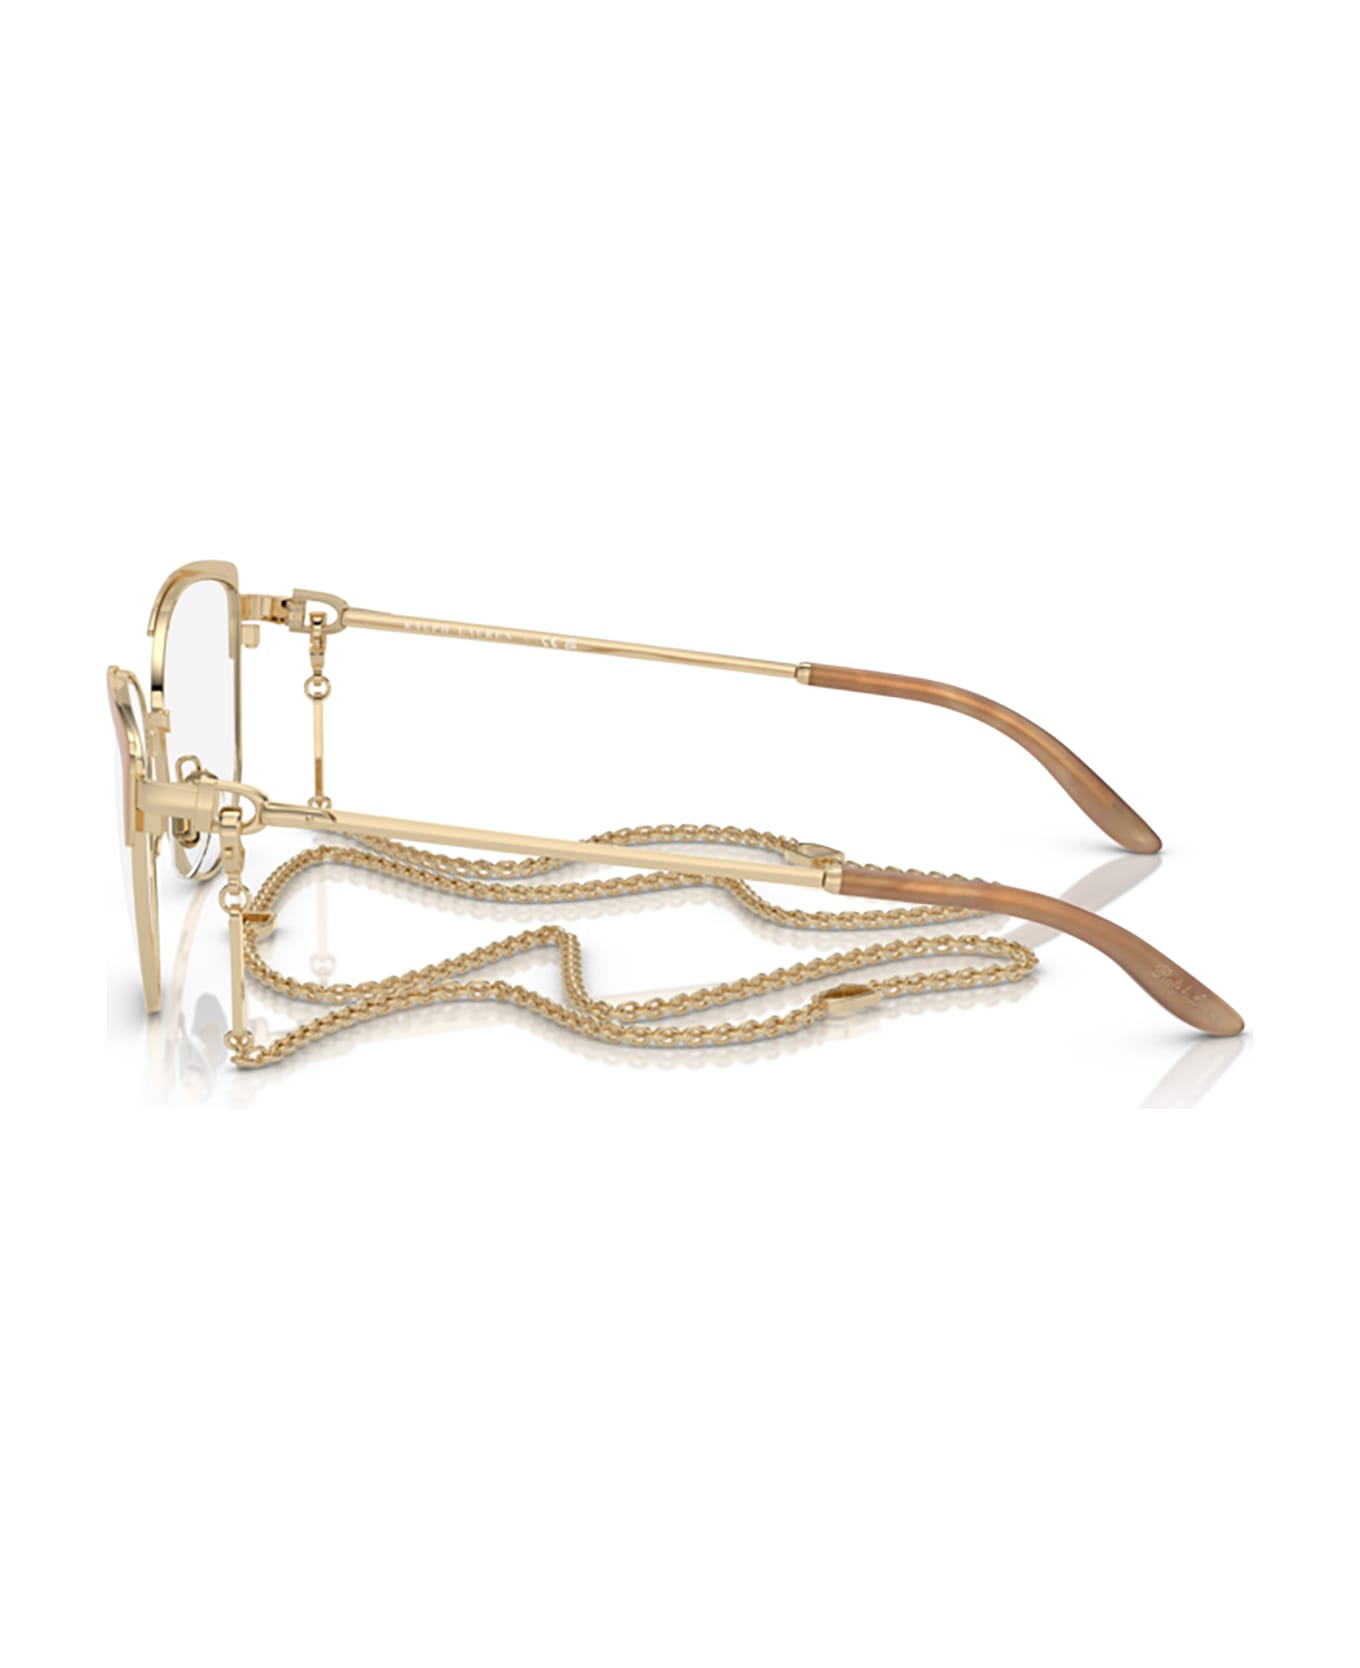 Ralph Lauren Rl5123 Nude / Pale Gold Glasses - Nude / Pale Gold アイウェア